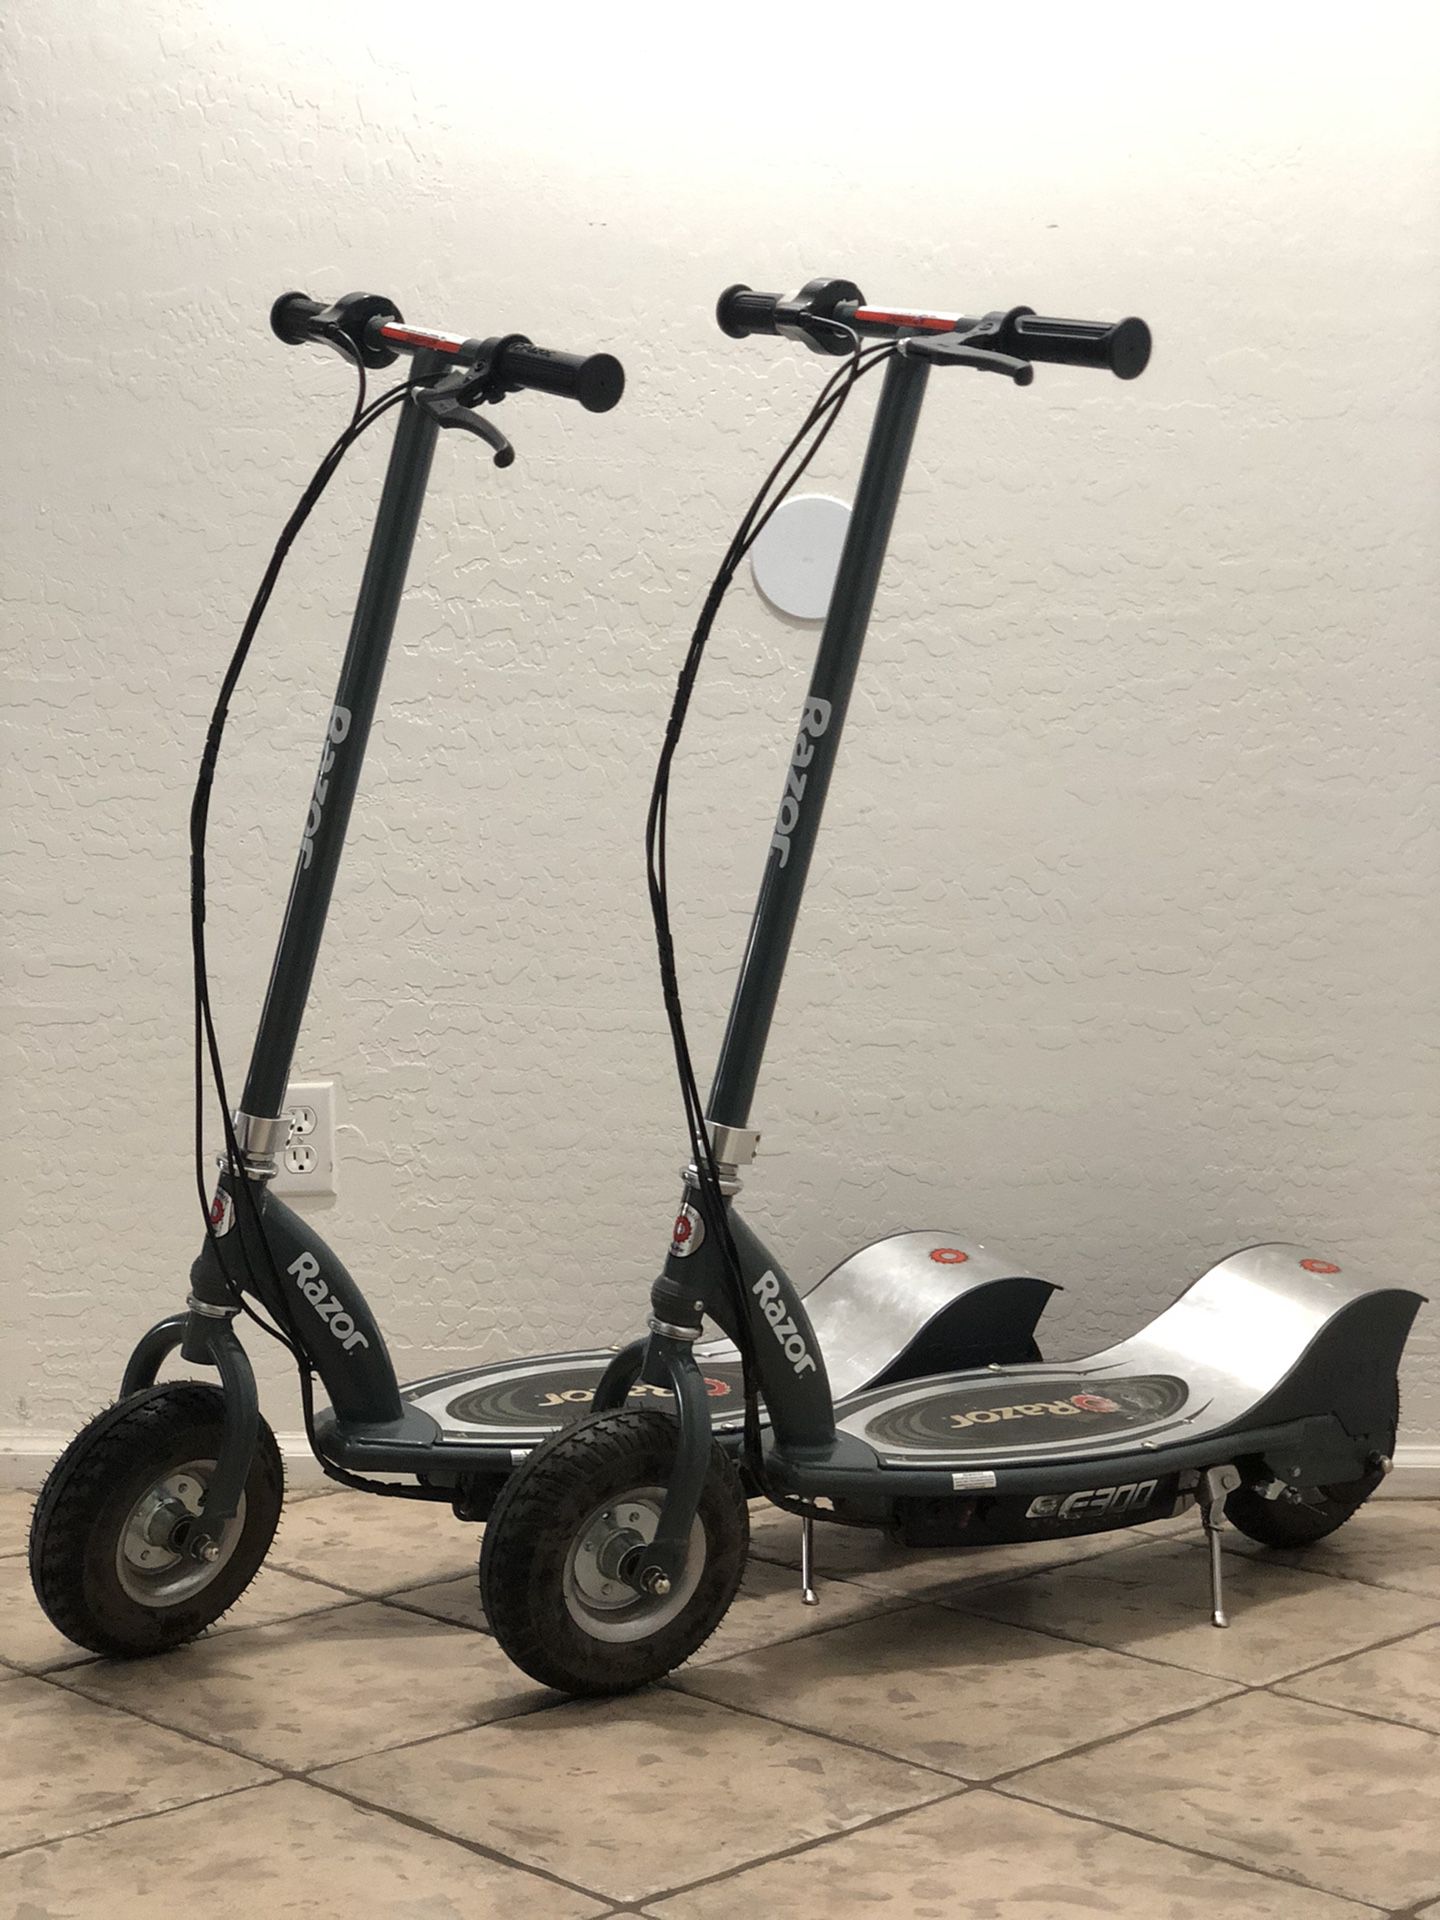 Razor E300 electric scooters with charger, SOLD SEPERATELY